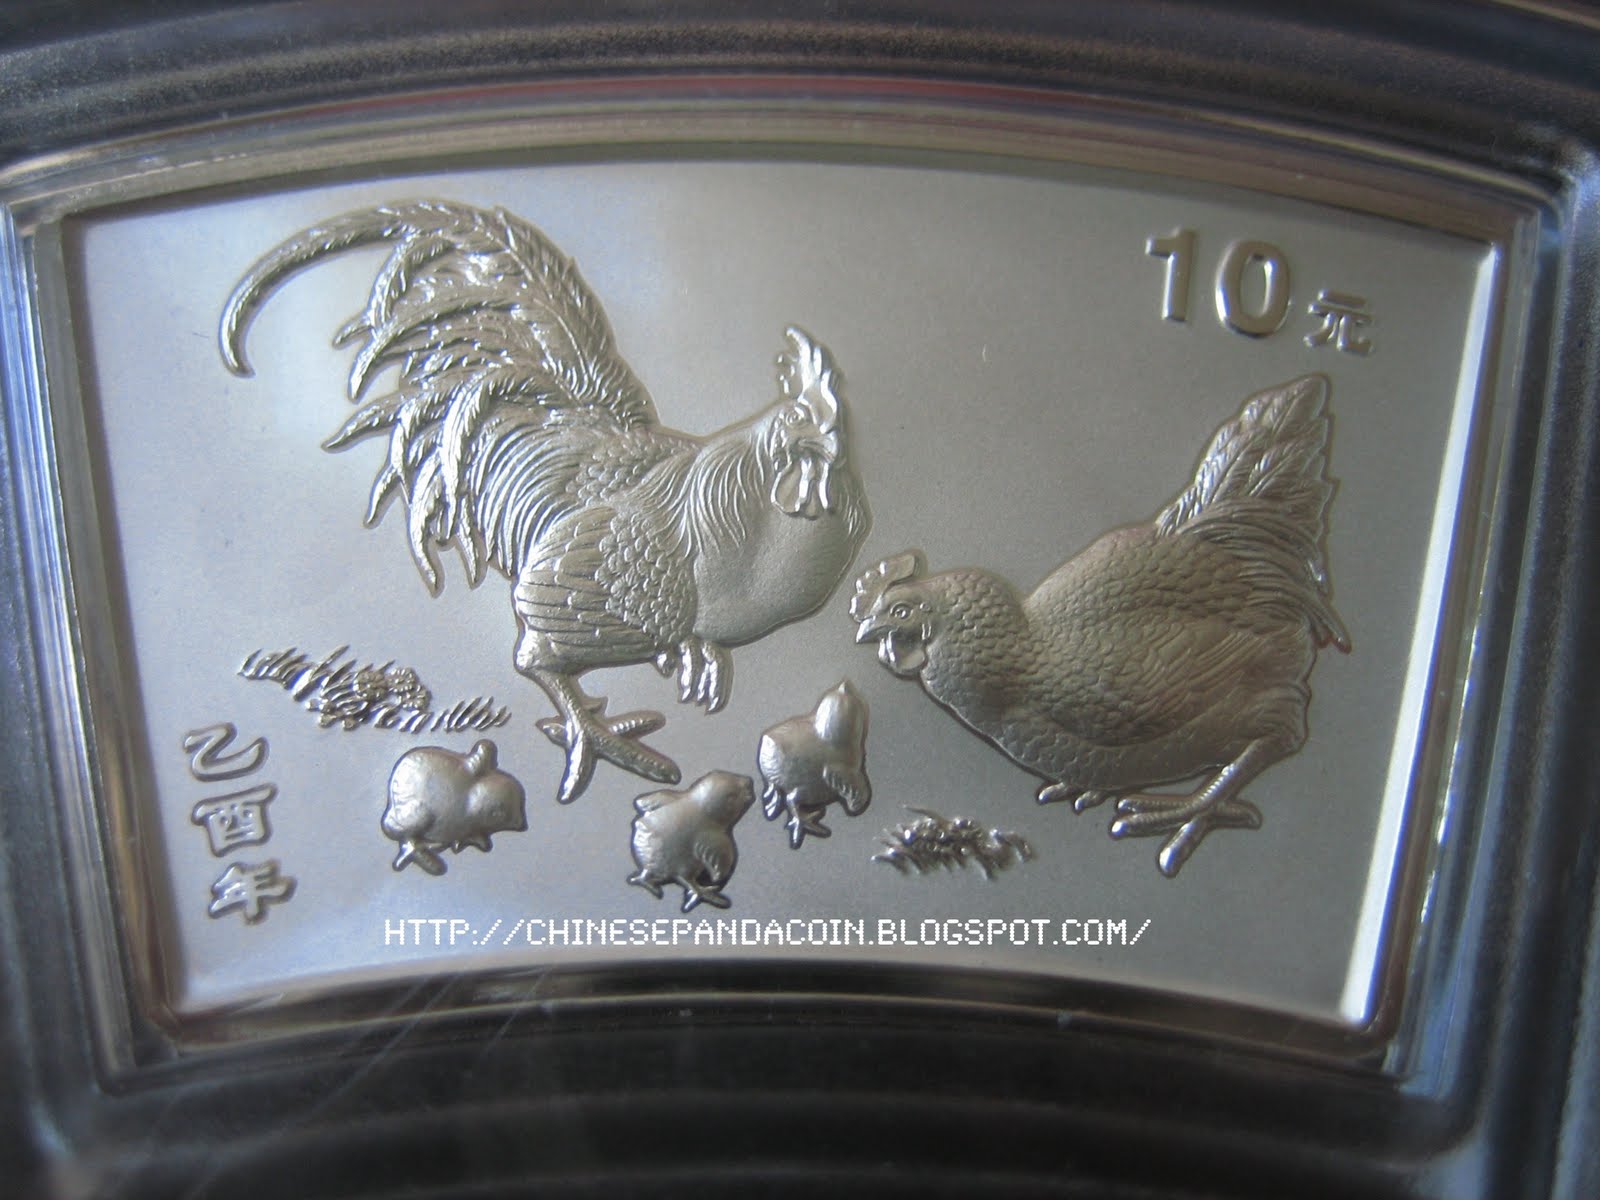 Chinese Panda Coin: Year 2005: Rooster Fan-Shaped Chinese ...